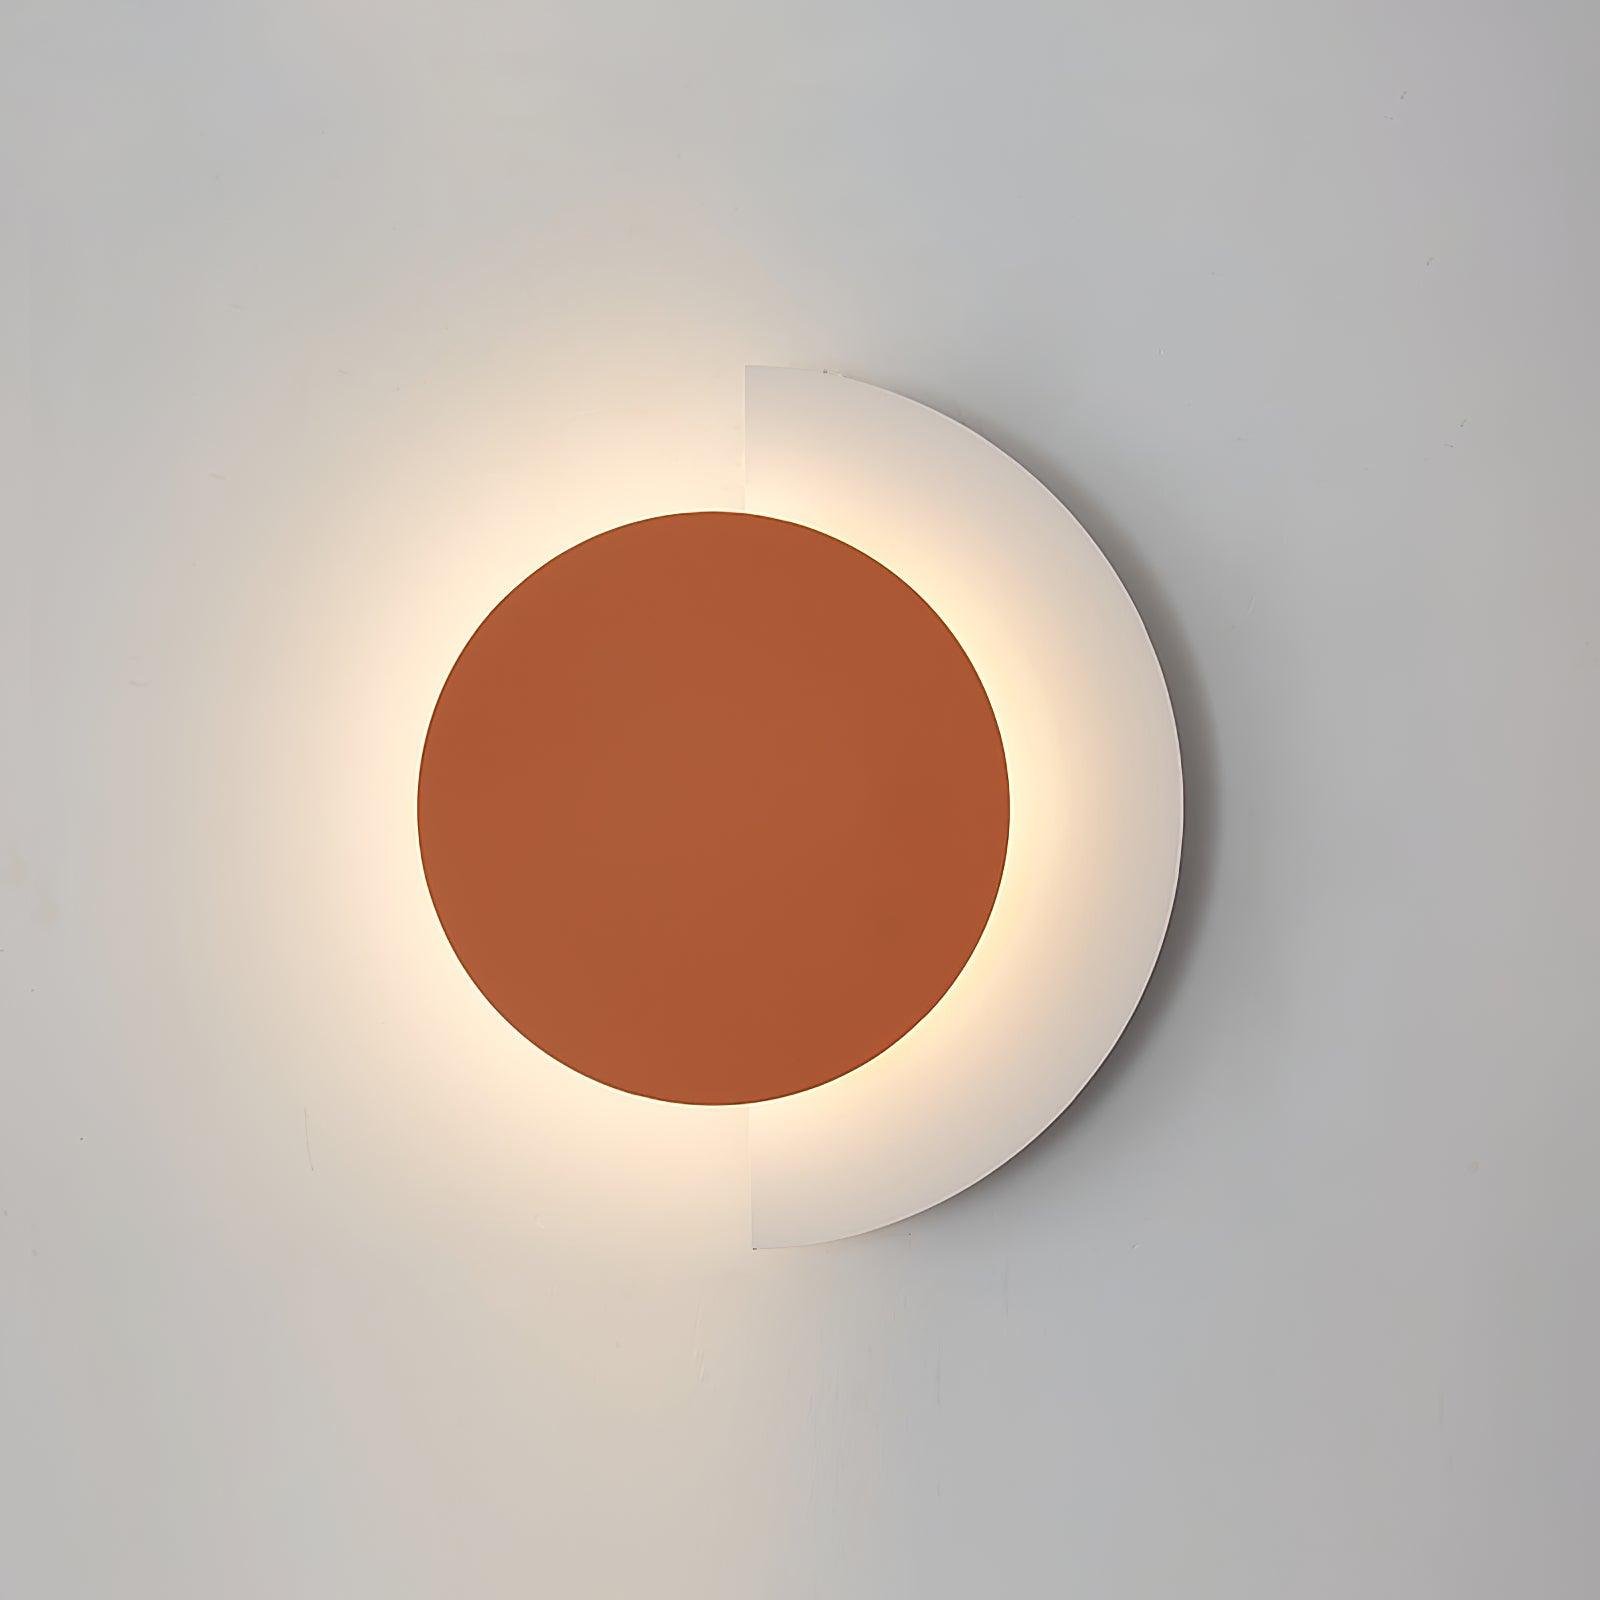 Abstract Art Sconce in Rounded Design, 8.1″ Diameter x 12″ Height (20.5cm x 30.5cm), Orange and White Color with Cool Light